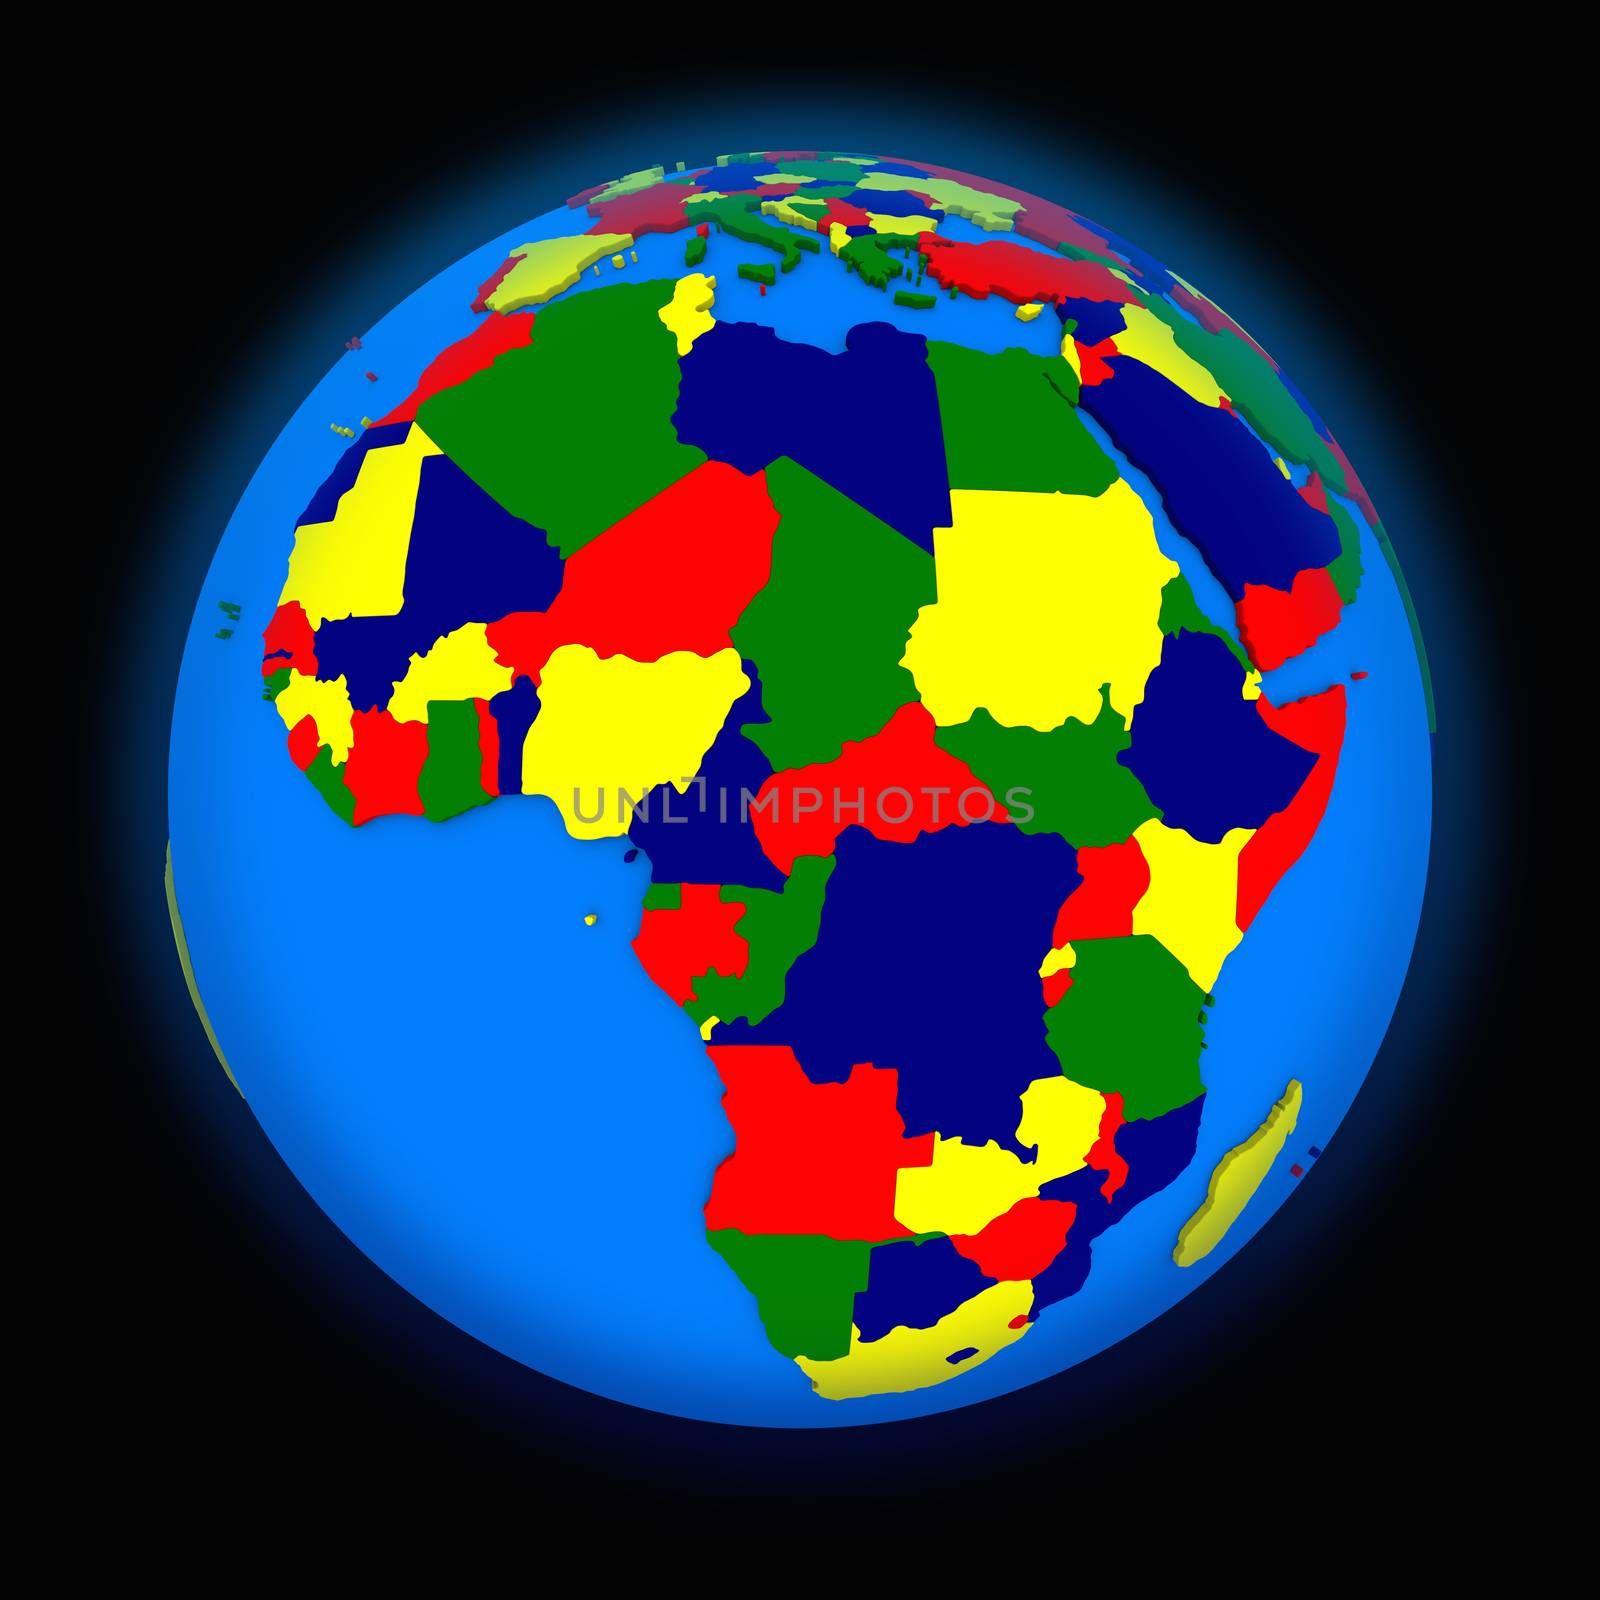 Africa on political Earth by Harvepino